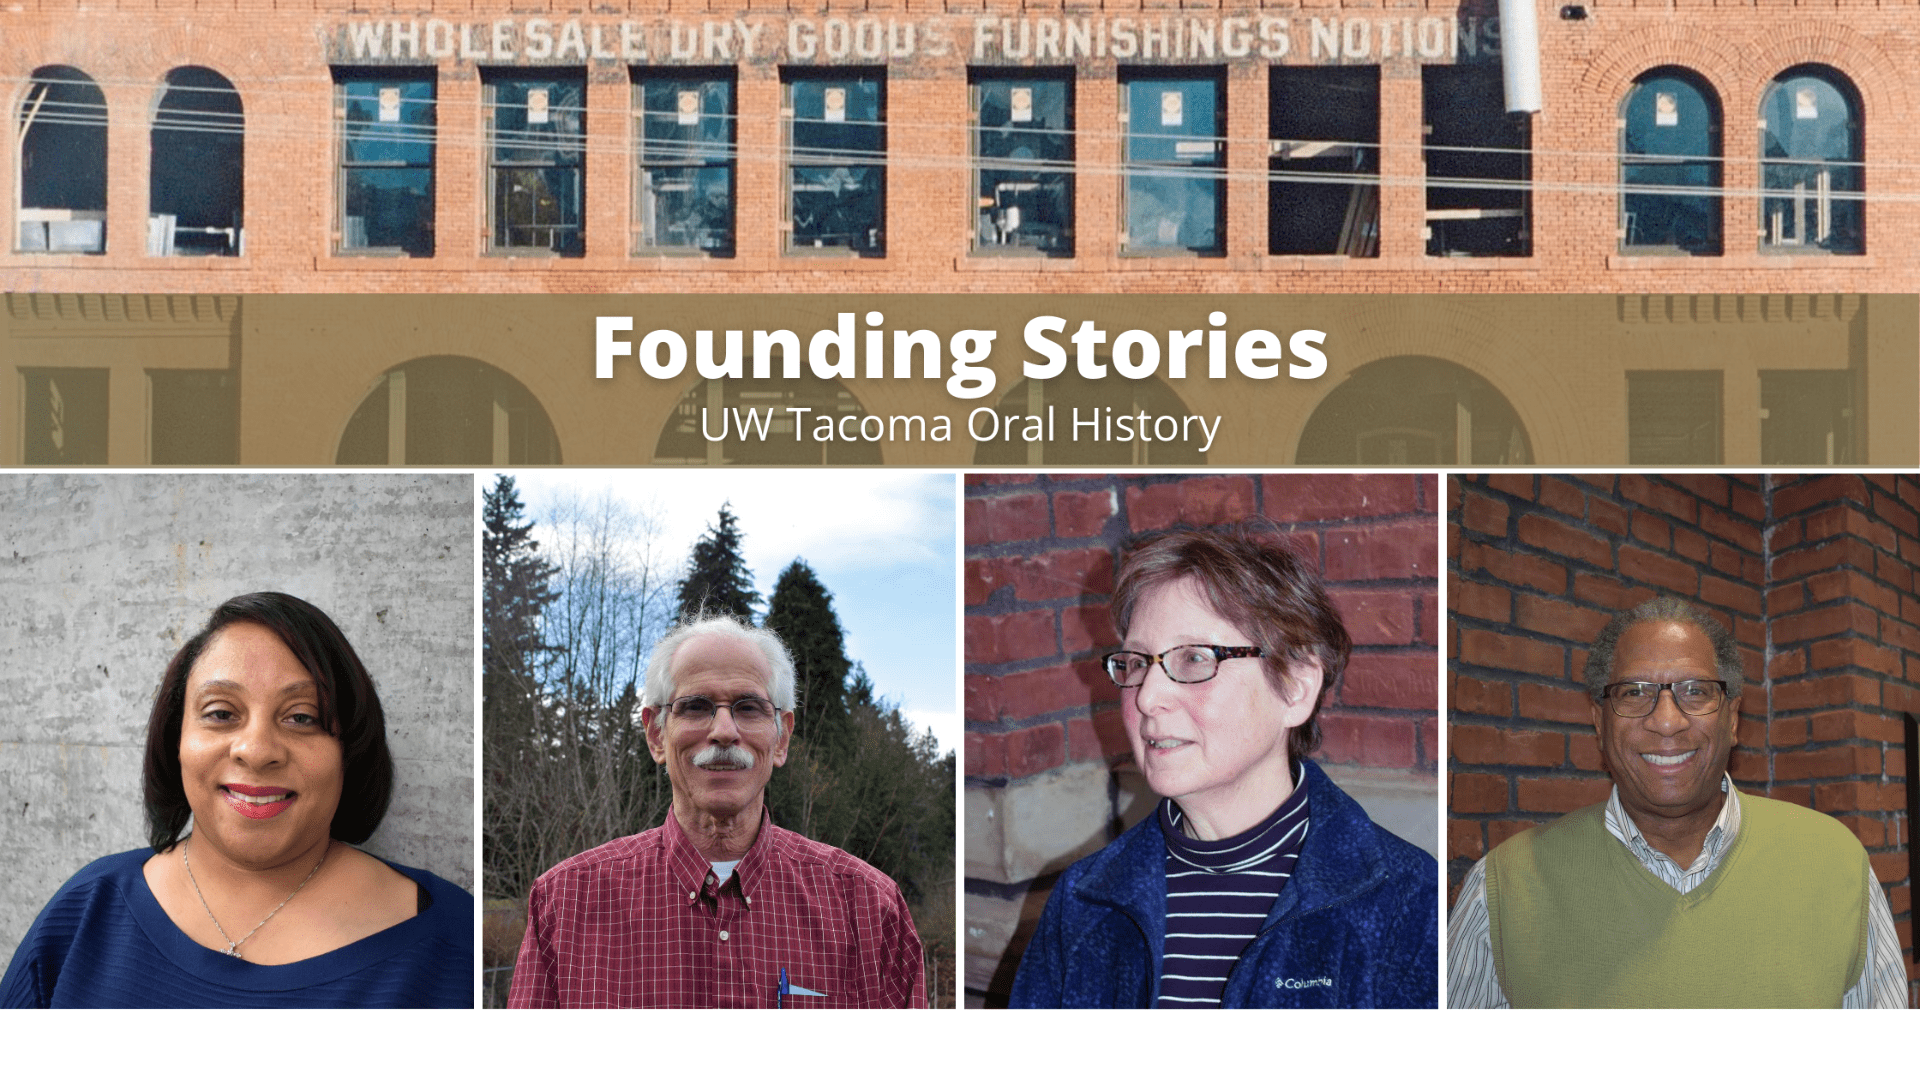 banner image showing text "Founding Stories" and "UW Tacoma Oral History" and images of a warehouse building facade and four individual portraits.